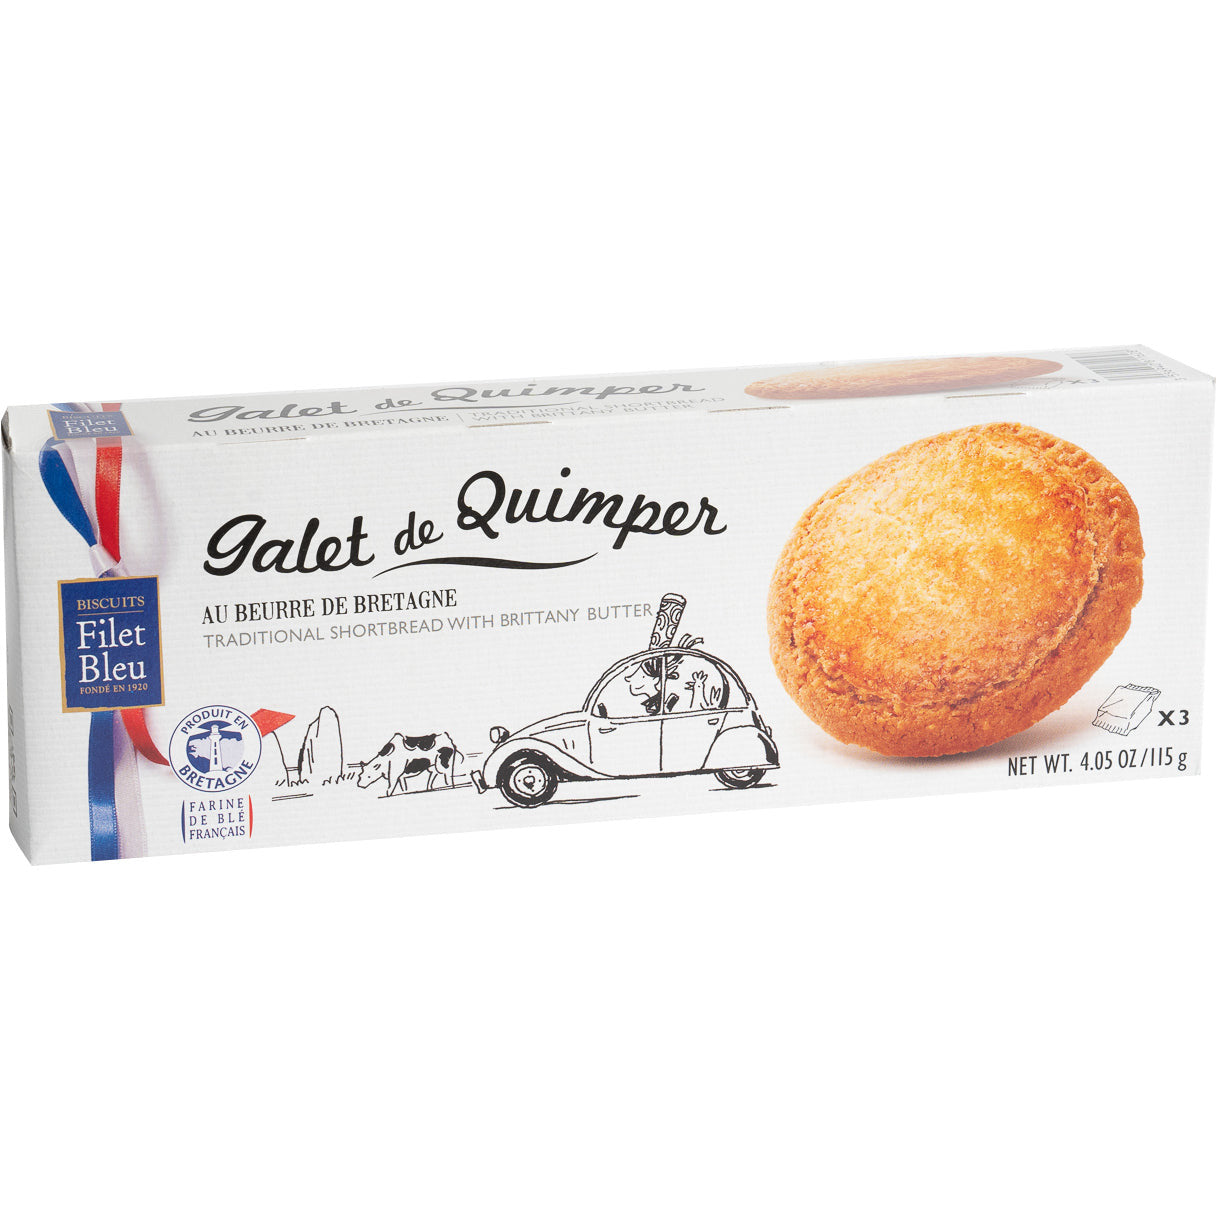 French Butter Biscuits (Galet de Quimper)